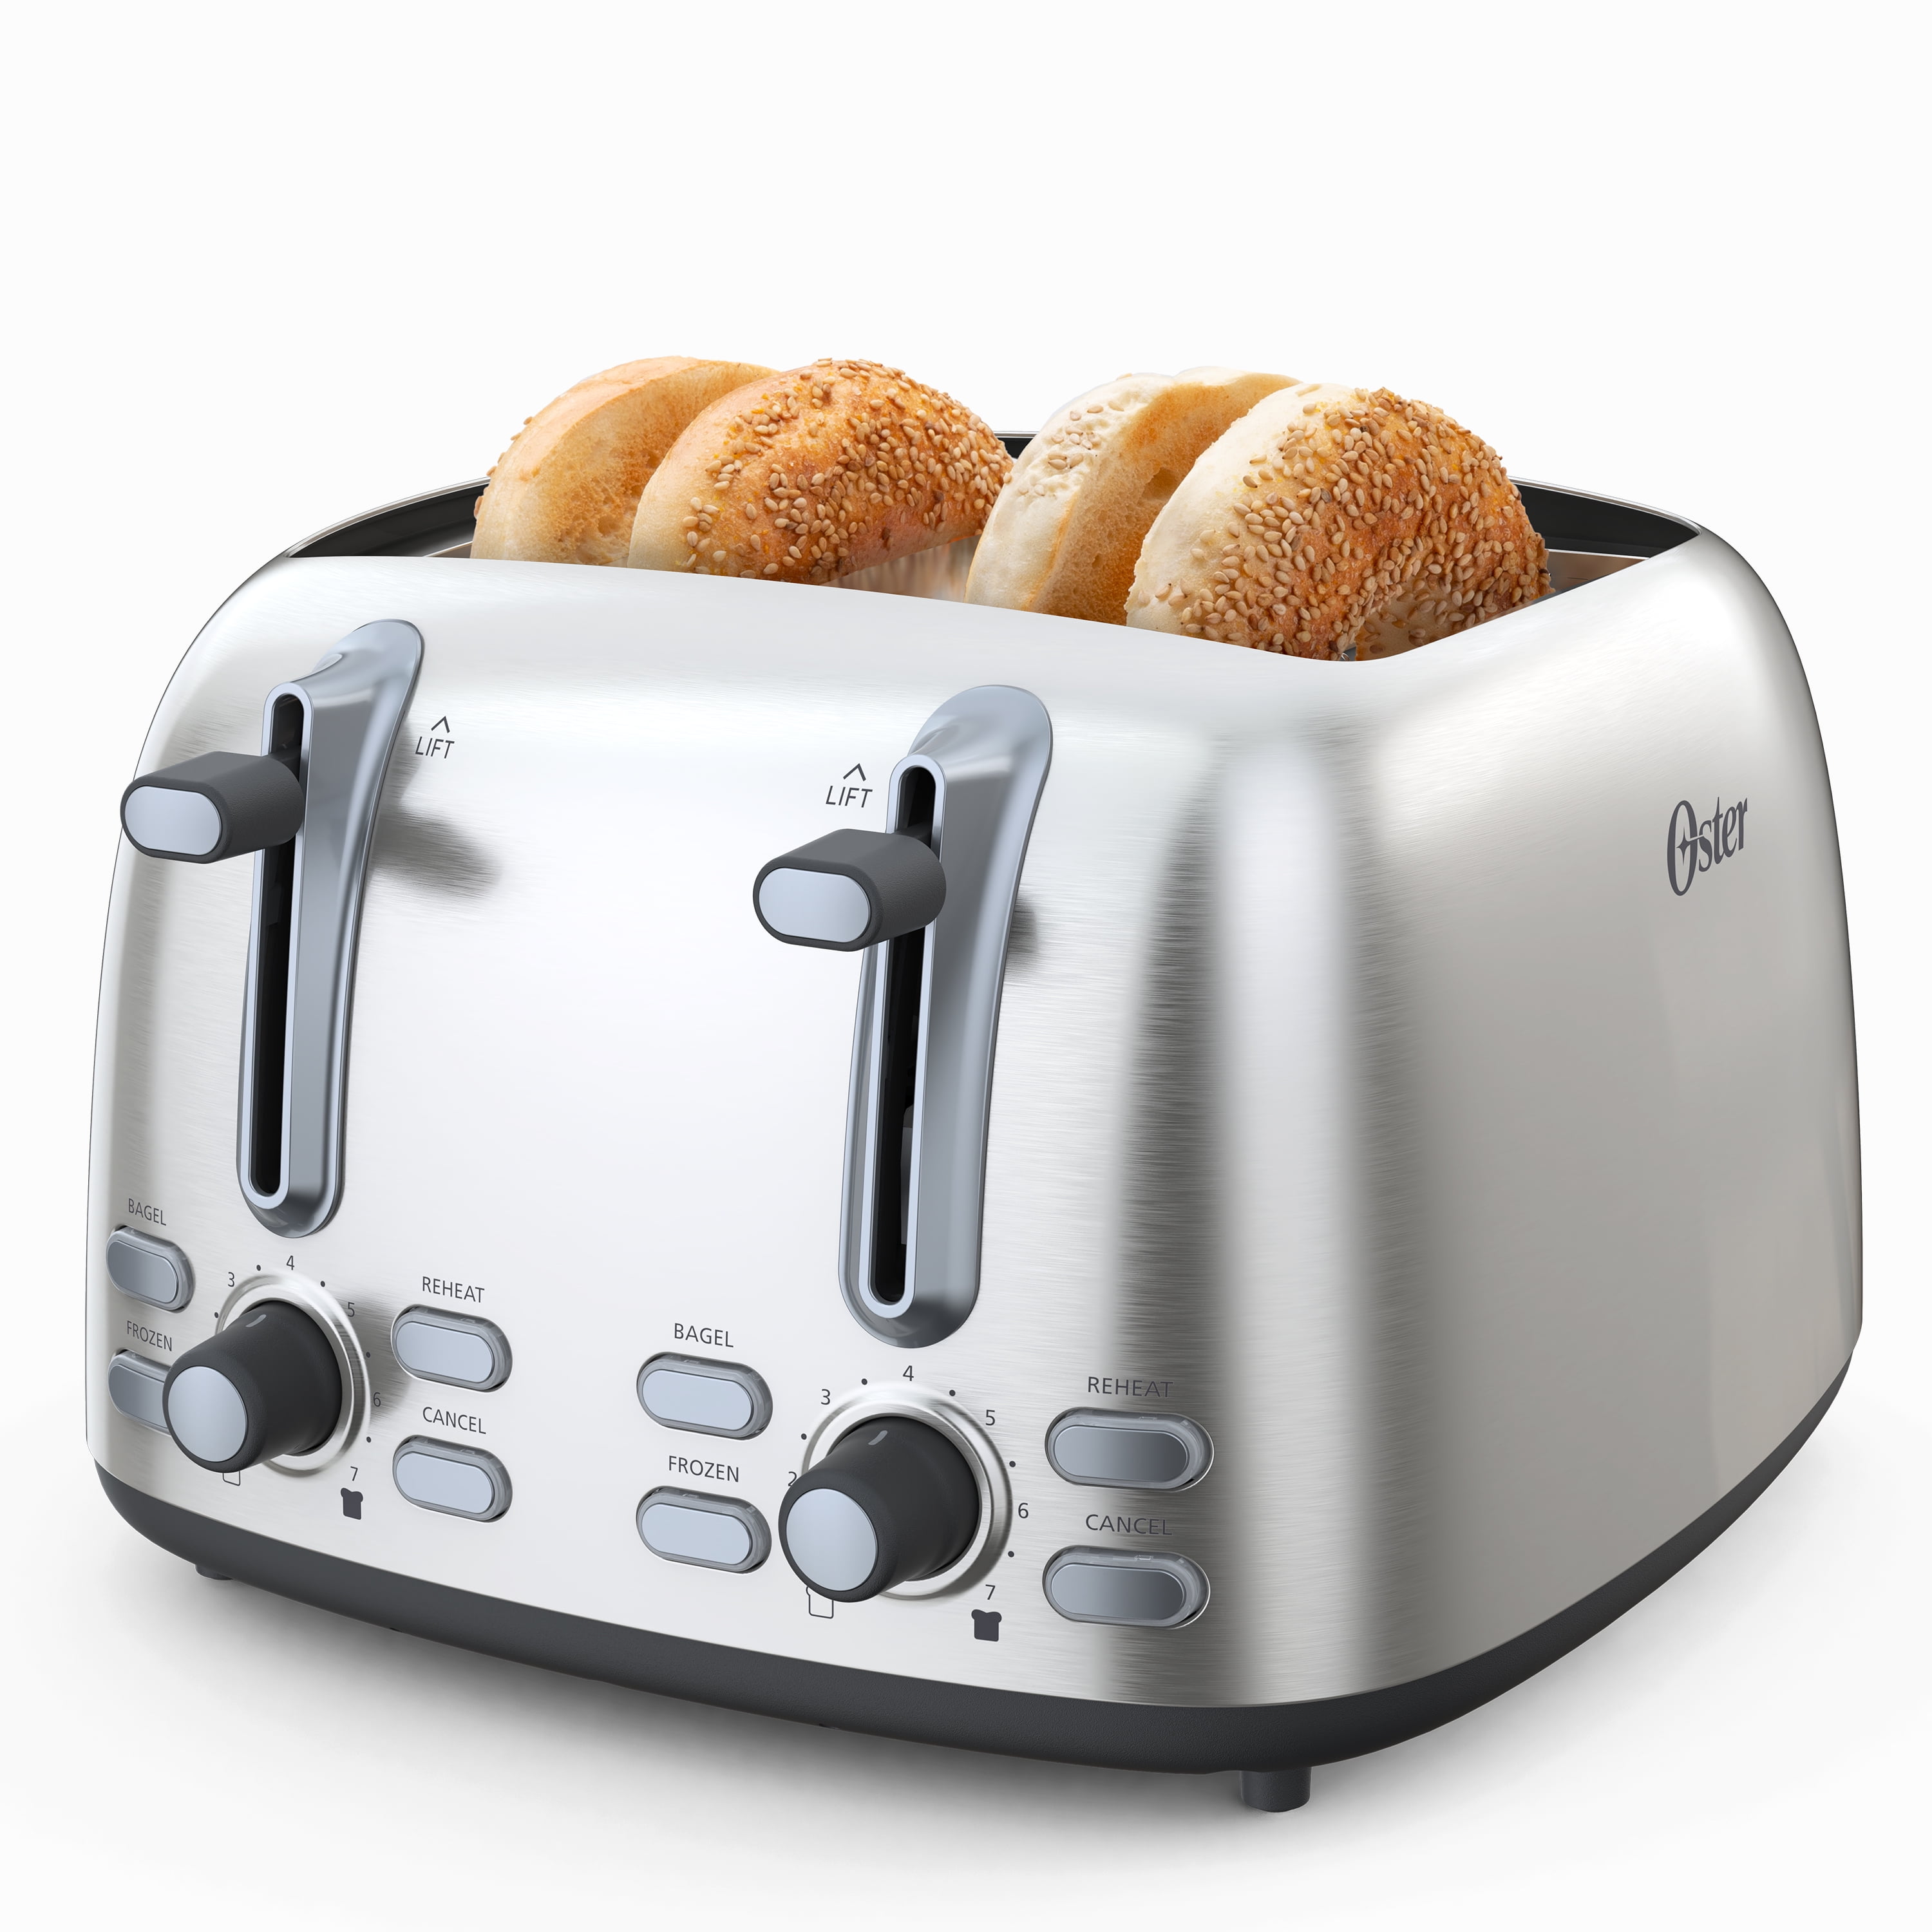 Stainless Steel/Black Oster 4-Slice Extra-Long-Slot Toaster 